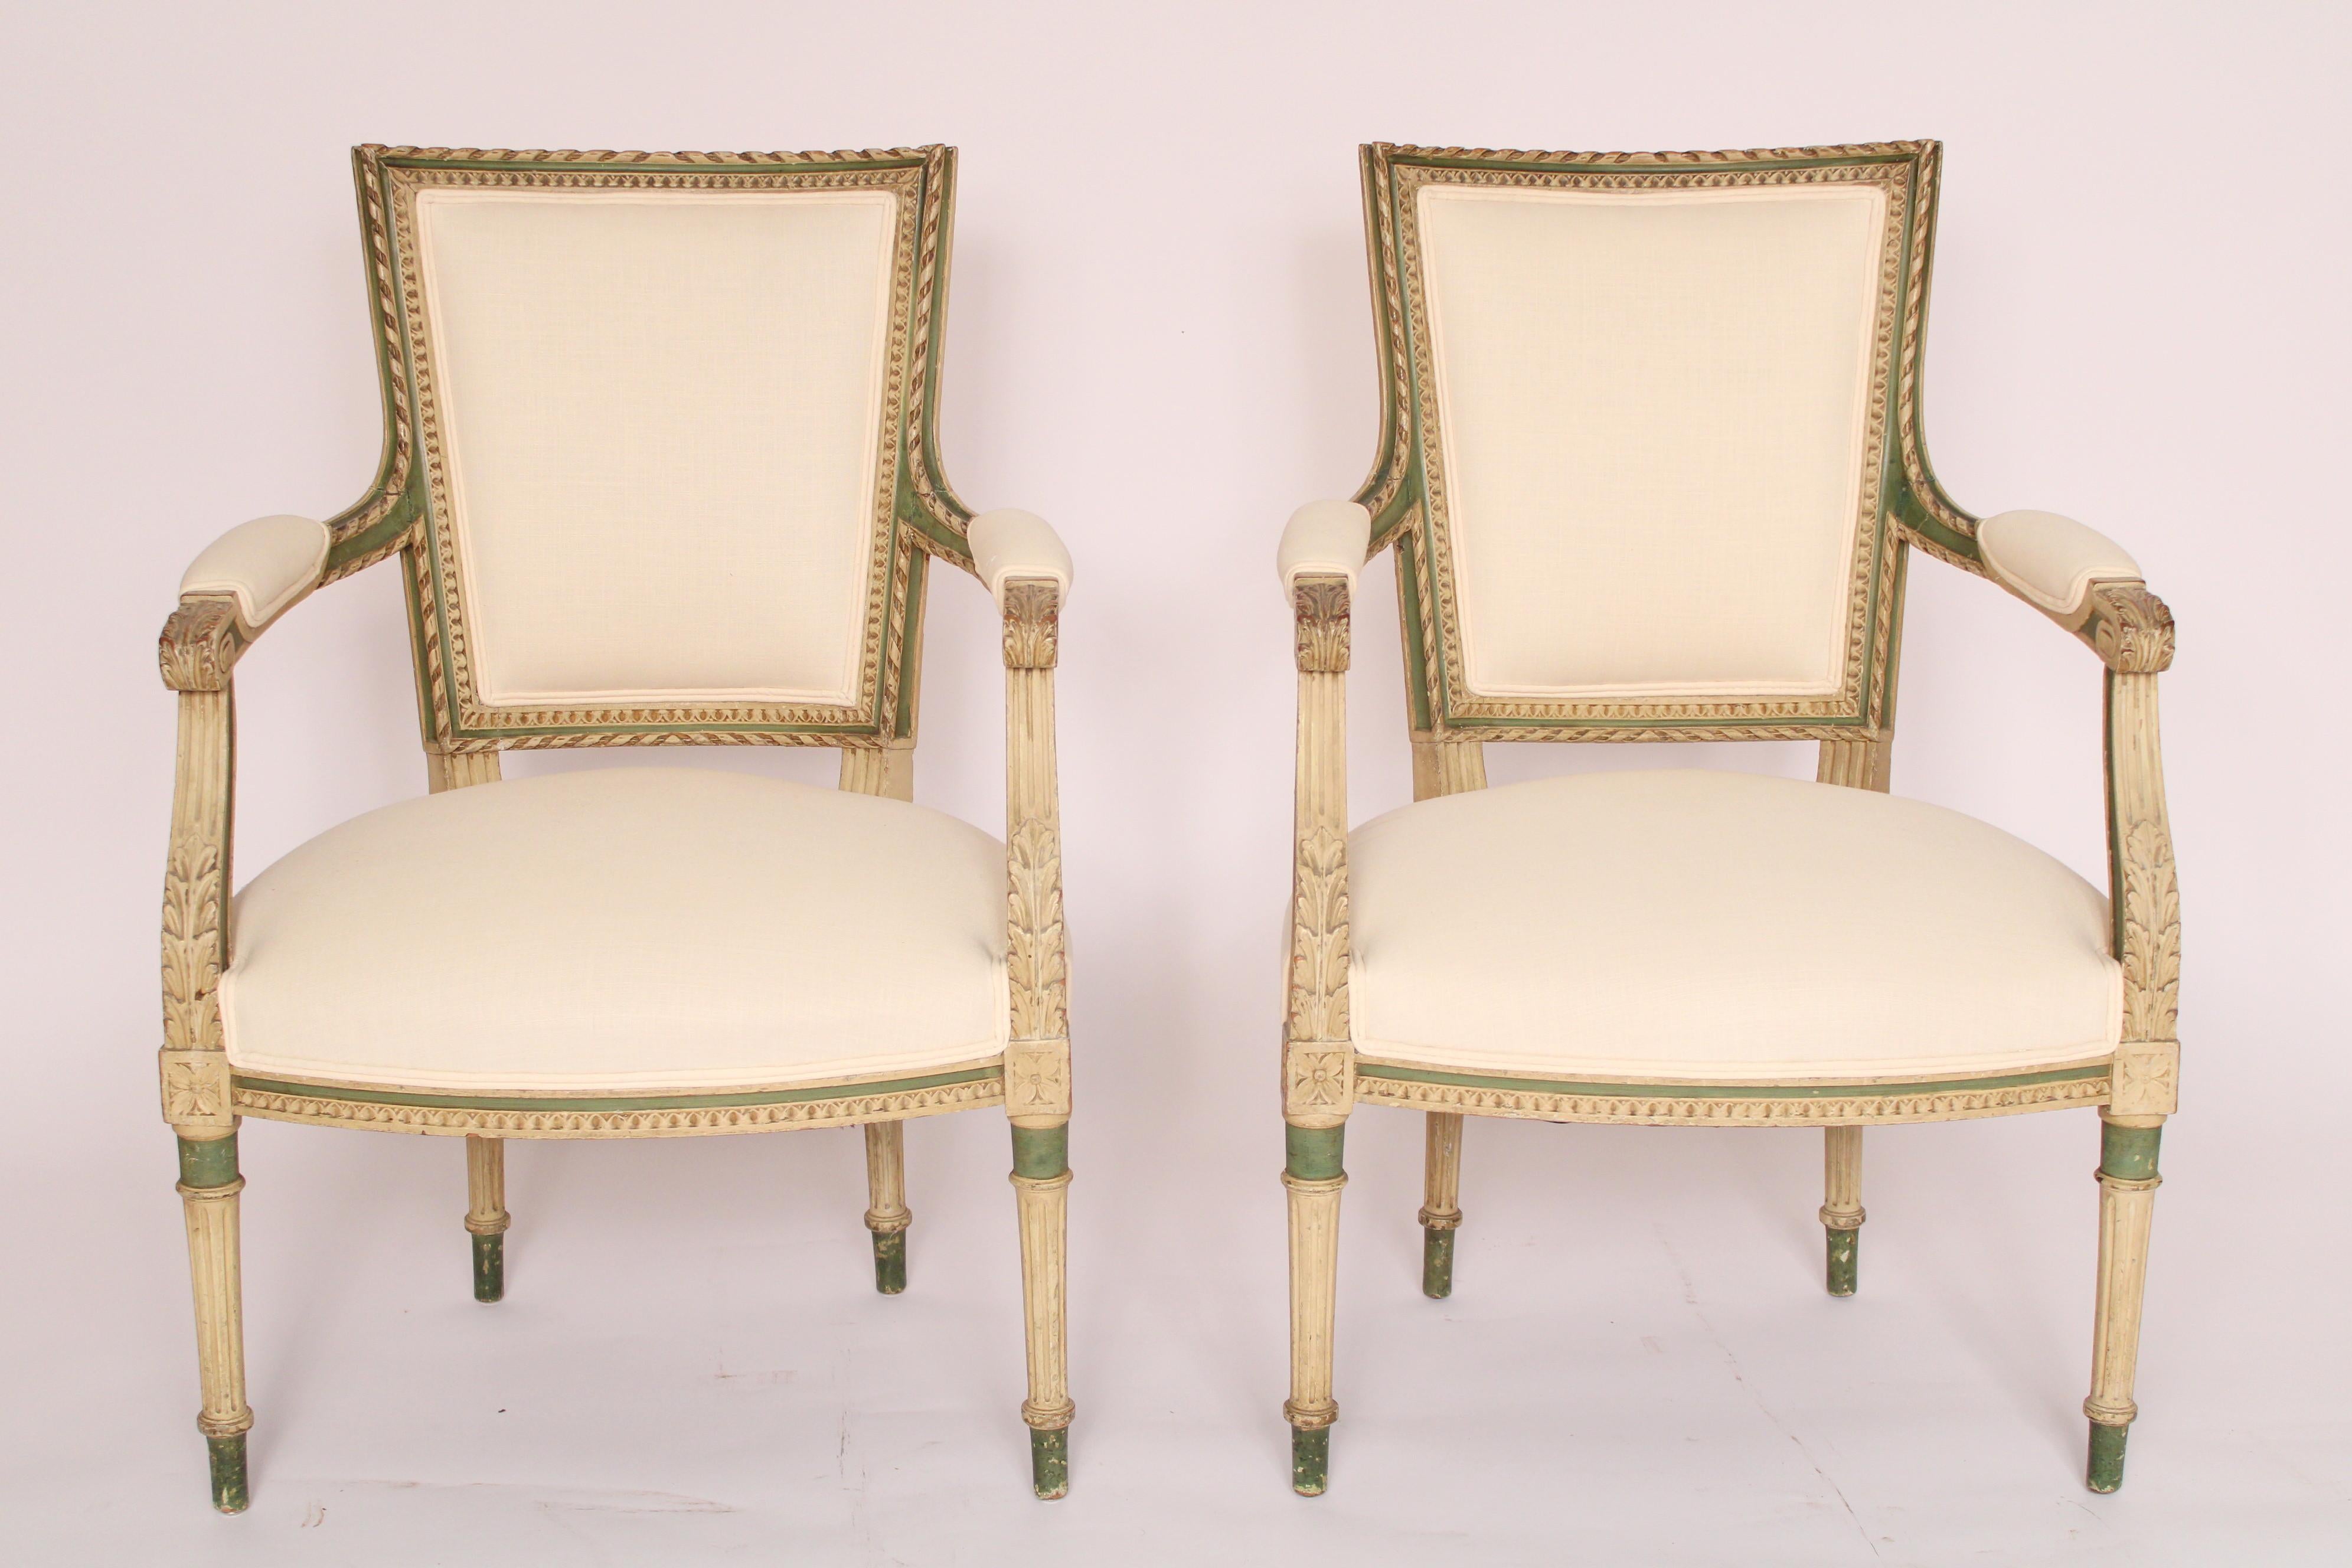 Pair of Louis XVI style painted armchairs, circa 1920. With rope carved trapezoid shaped backs, armrest ending with acanthus carvings, down swept fluted and acanthus carved arm supports, upholstered seats resting on turned tapered fluted legs.